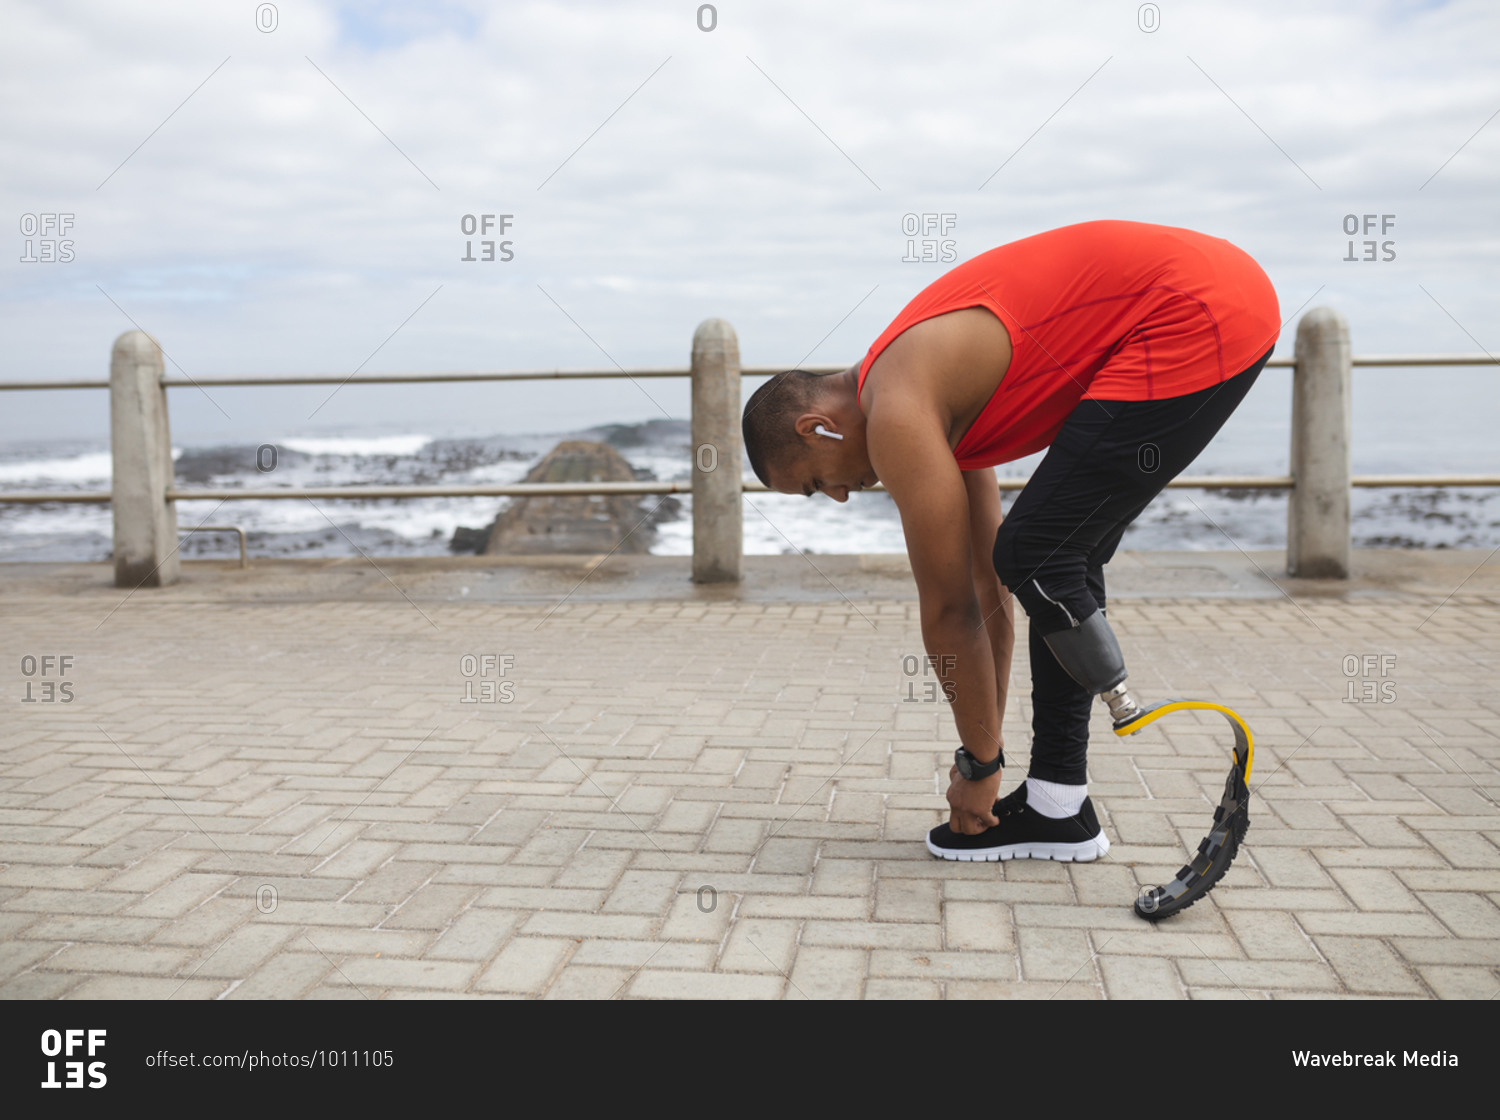 Disabled mixed race man with a prosthetic leg and running blade working out by the coast wearing wireless earphones, bending down to tie his shoelace. Fitness disability healthy lifestyle.